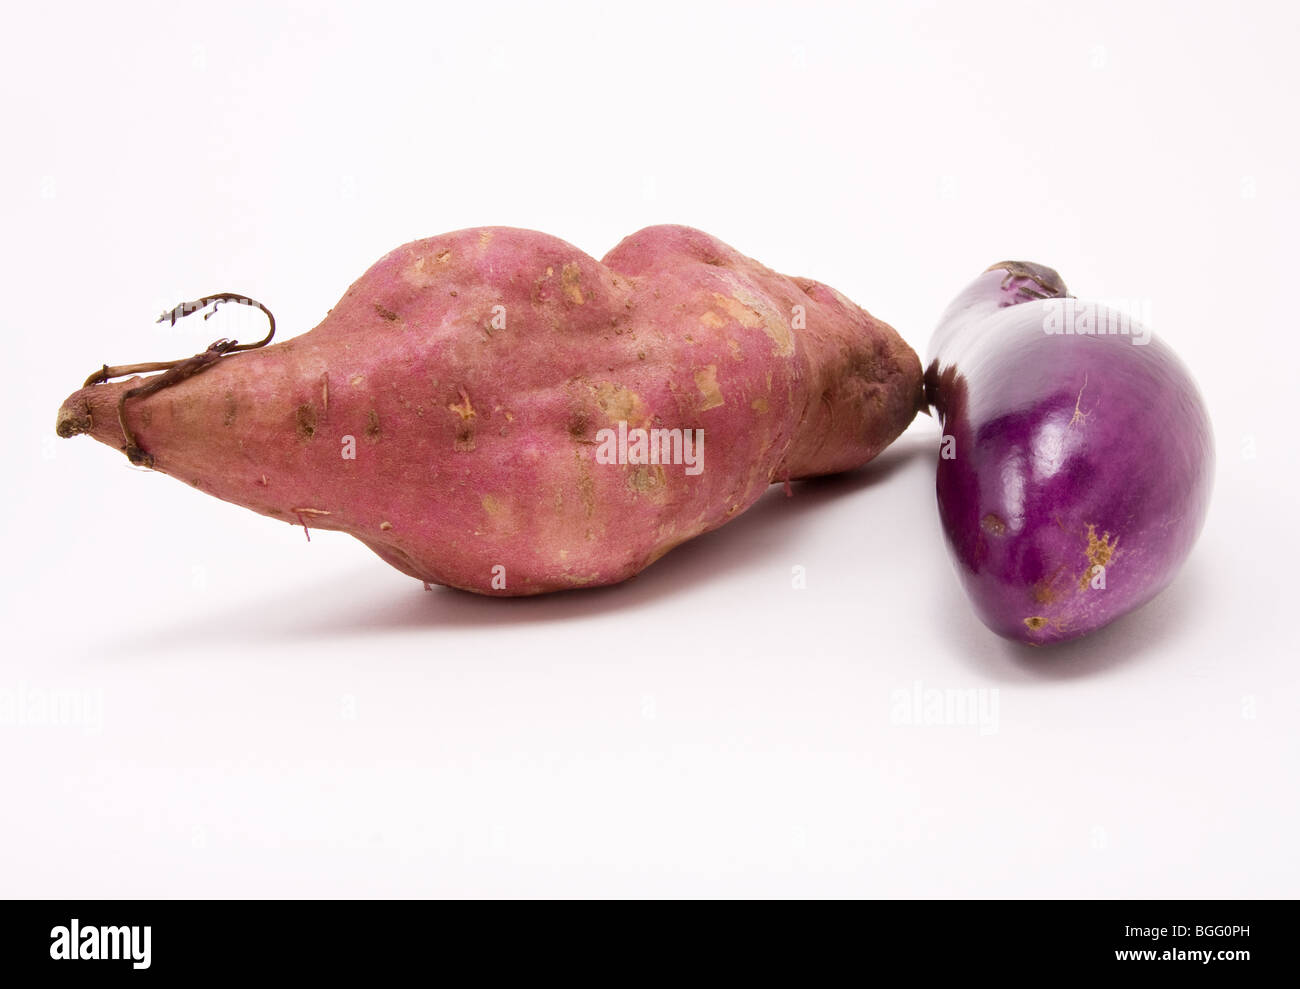 Sweet potato and Aubergine against white background from low perspective. Stock Photo